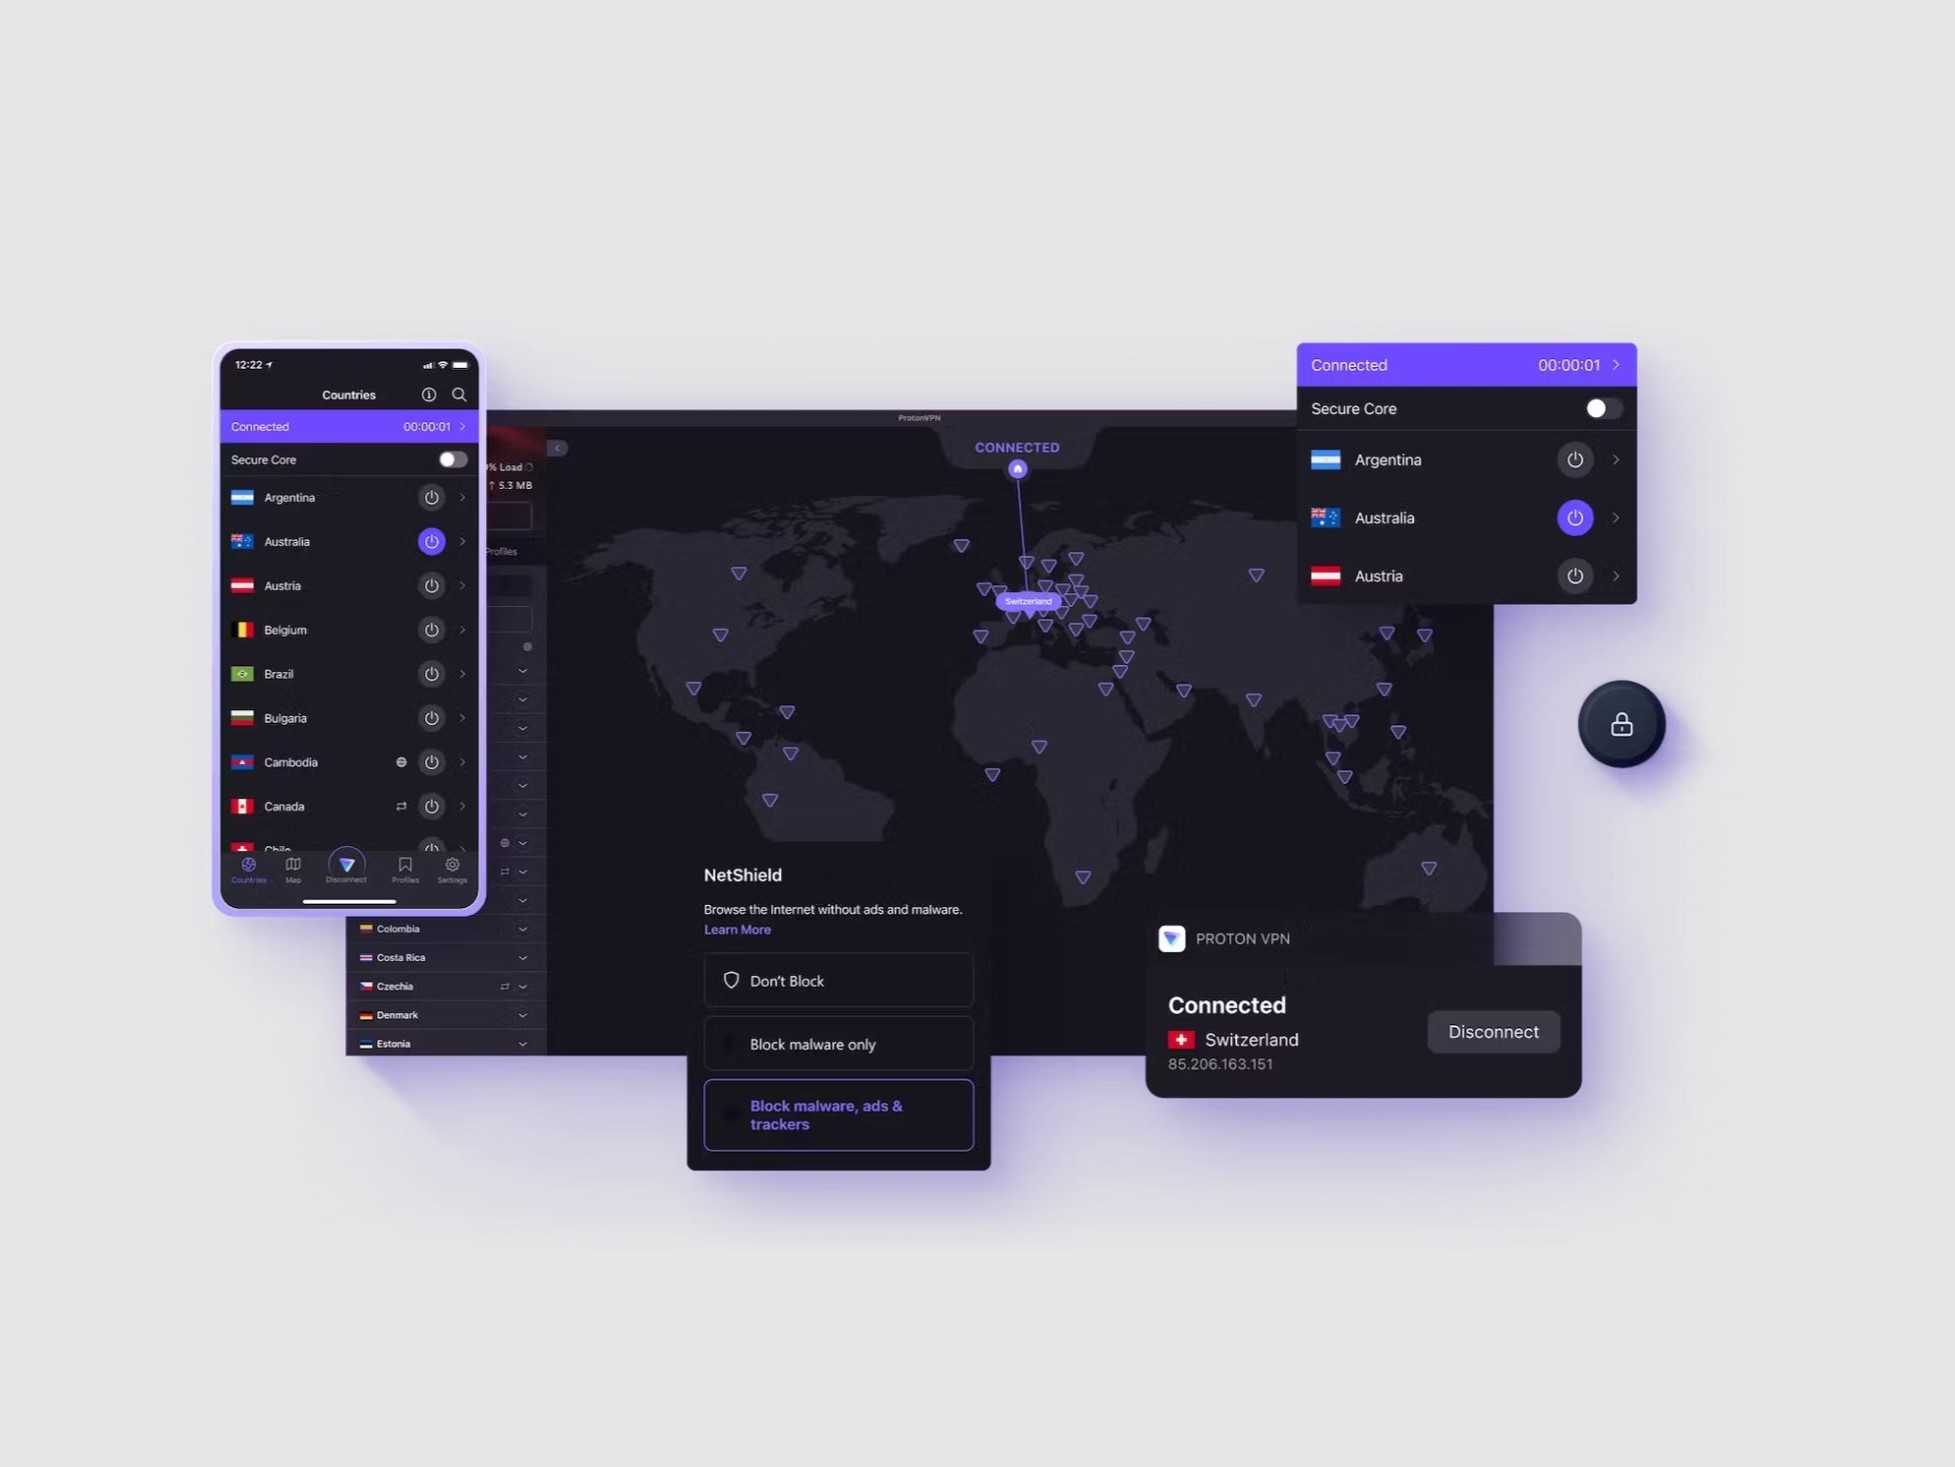 The best gaming VPN 2020,Top rated VPN for 2020